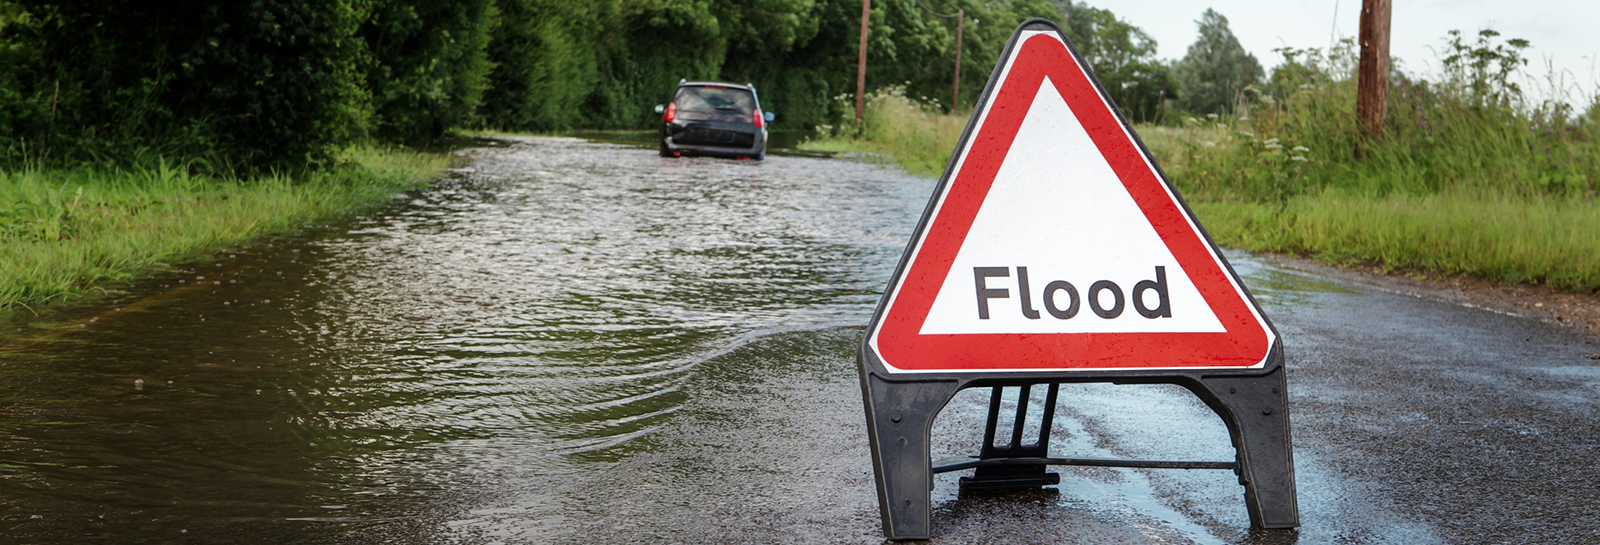 Flooded road with flood warning sign banner image